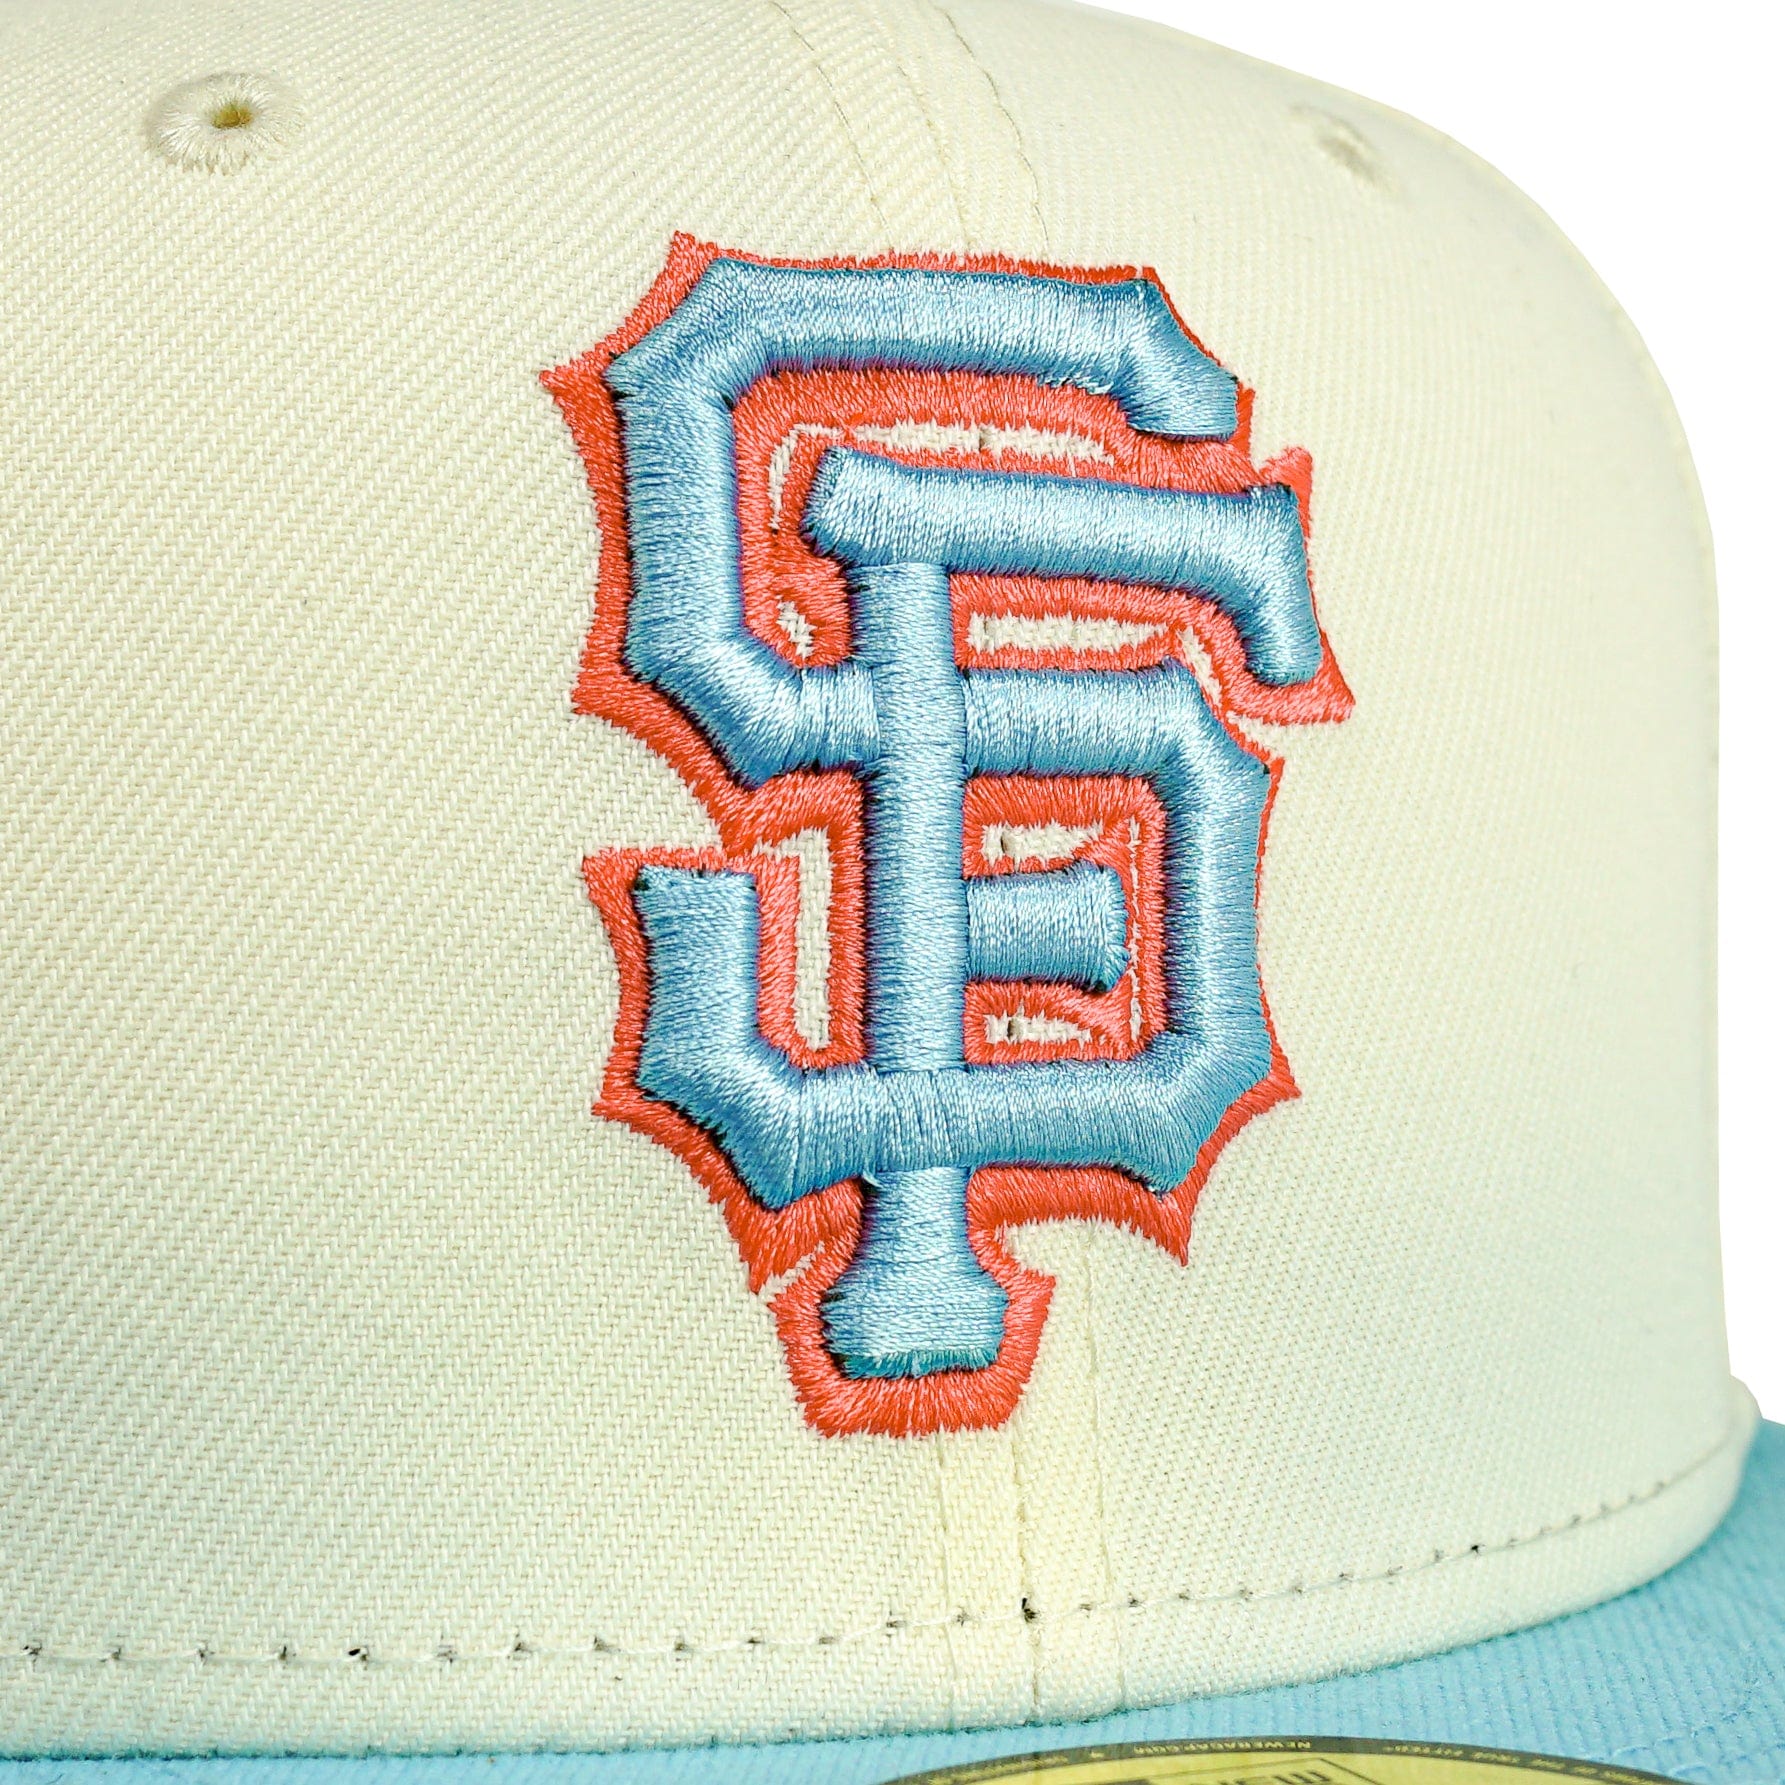 San Francisco Giants 2-Tone Colorpack 59Fifty Fitted Hat in cream and light blue - New Era - State Of Flux